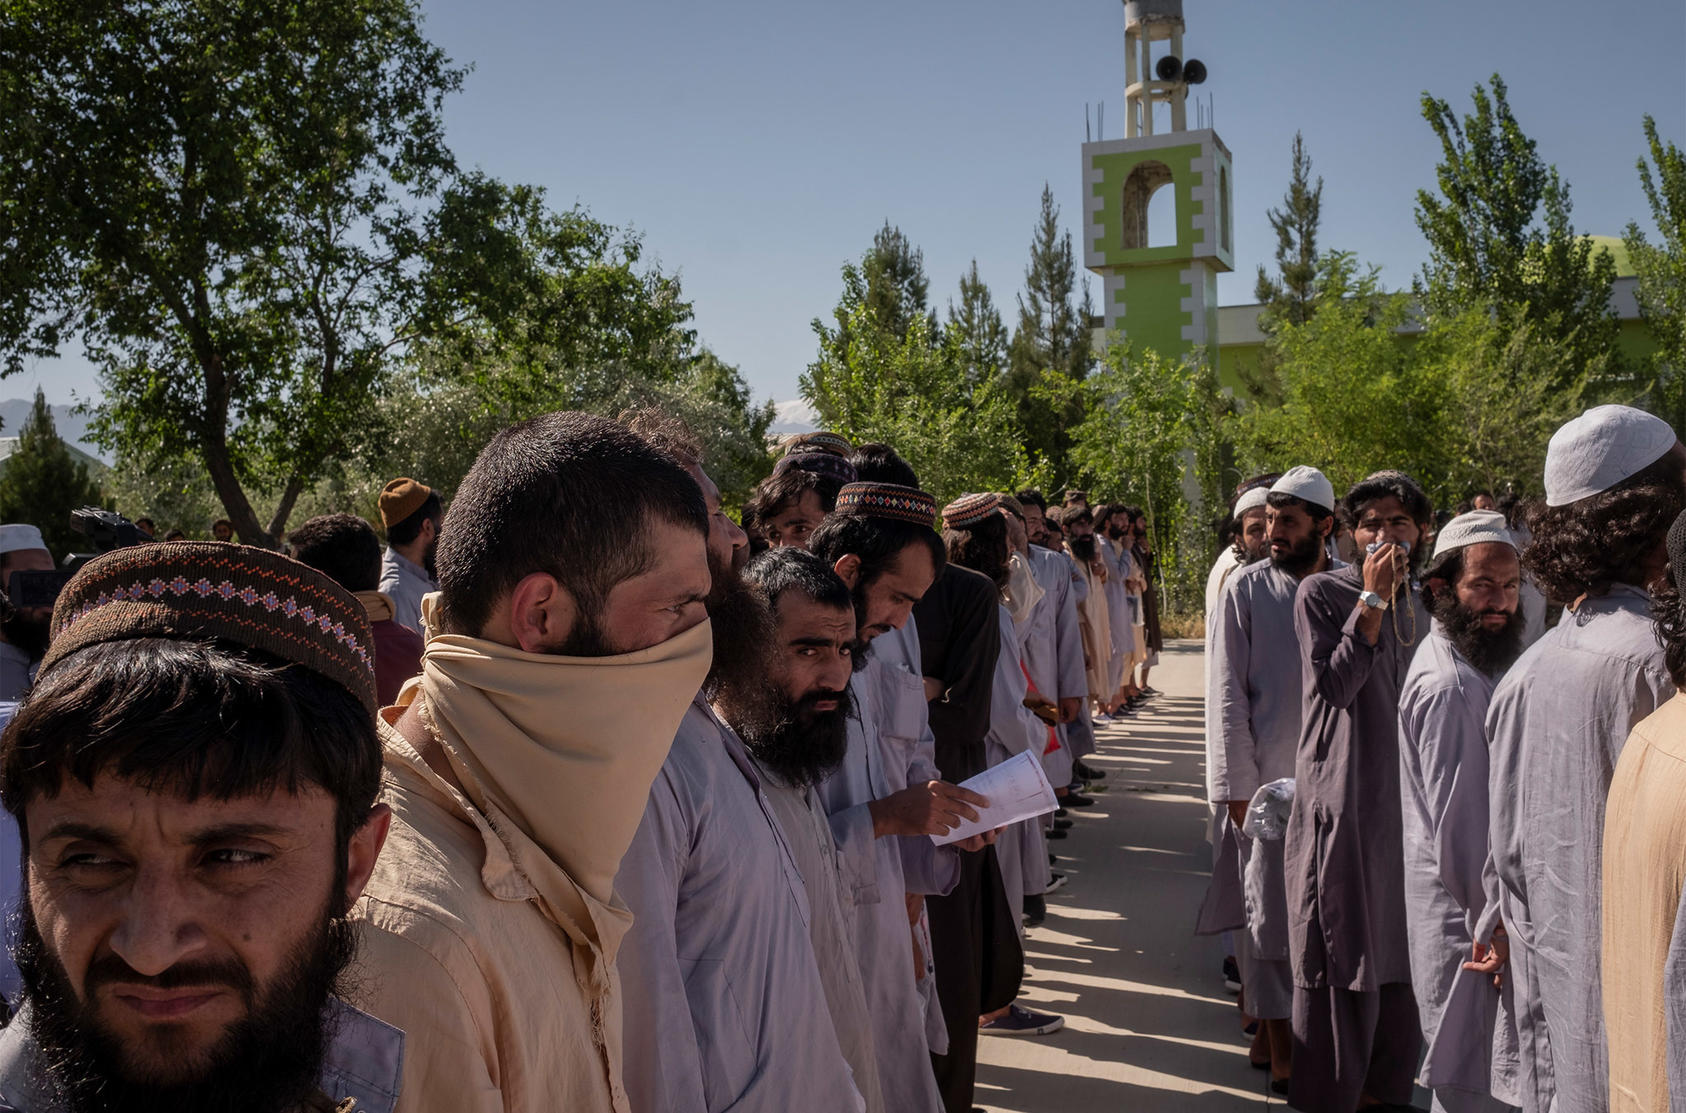 Afghan authorities assembled Taliban prisoners at the Bagram military base before releasing them in May. The government has sought assurances that released Taliban fighters will not return to the battlefield. (Jim Huylebroek/The New York Times)